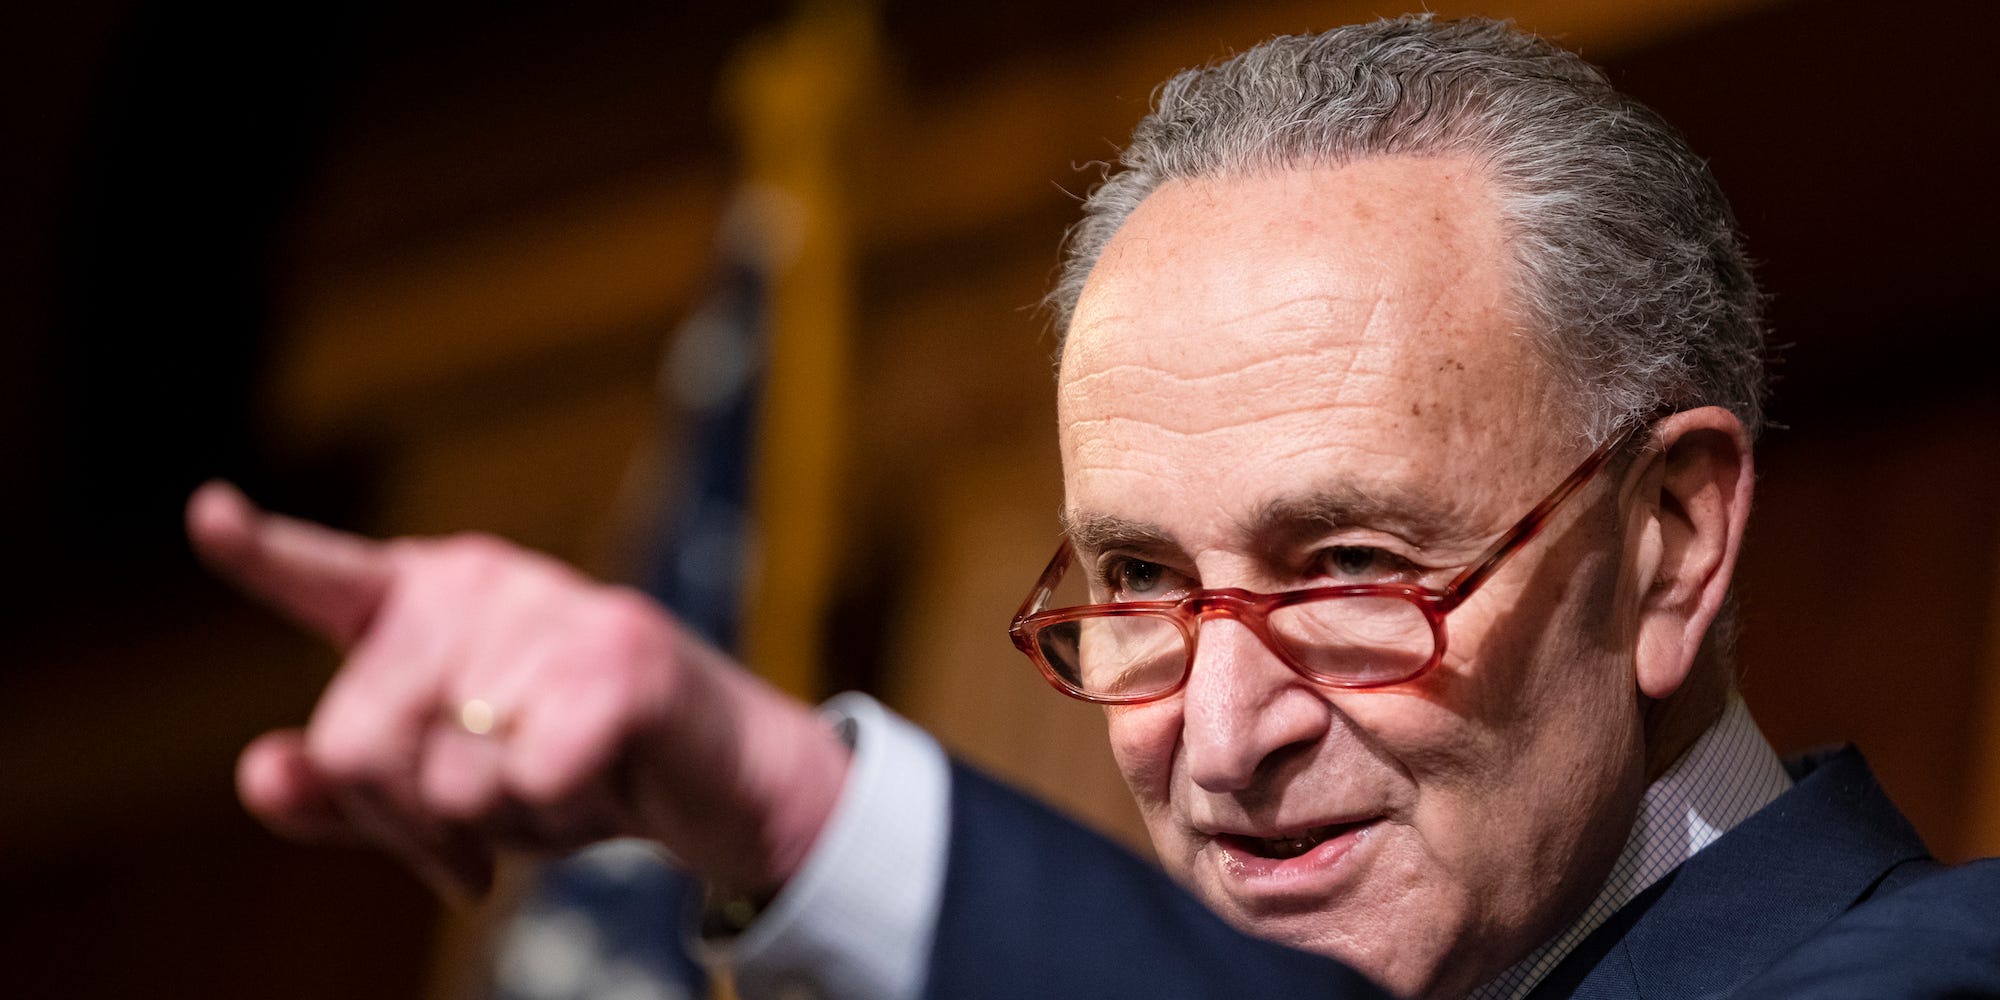 Senate Minority Leader Chuck Schumer tears into ‘completely inadequate’ GOP stimulus proposal